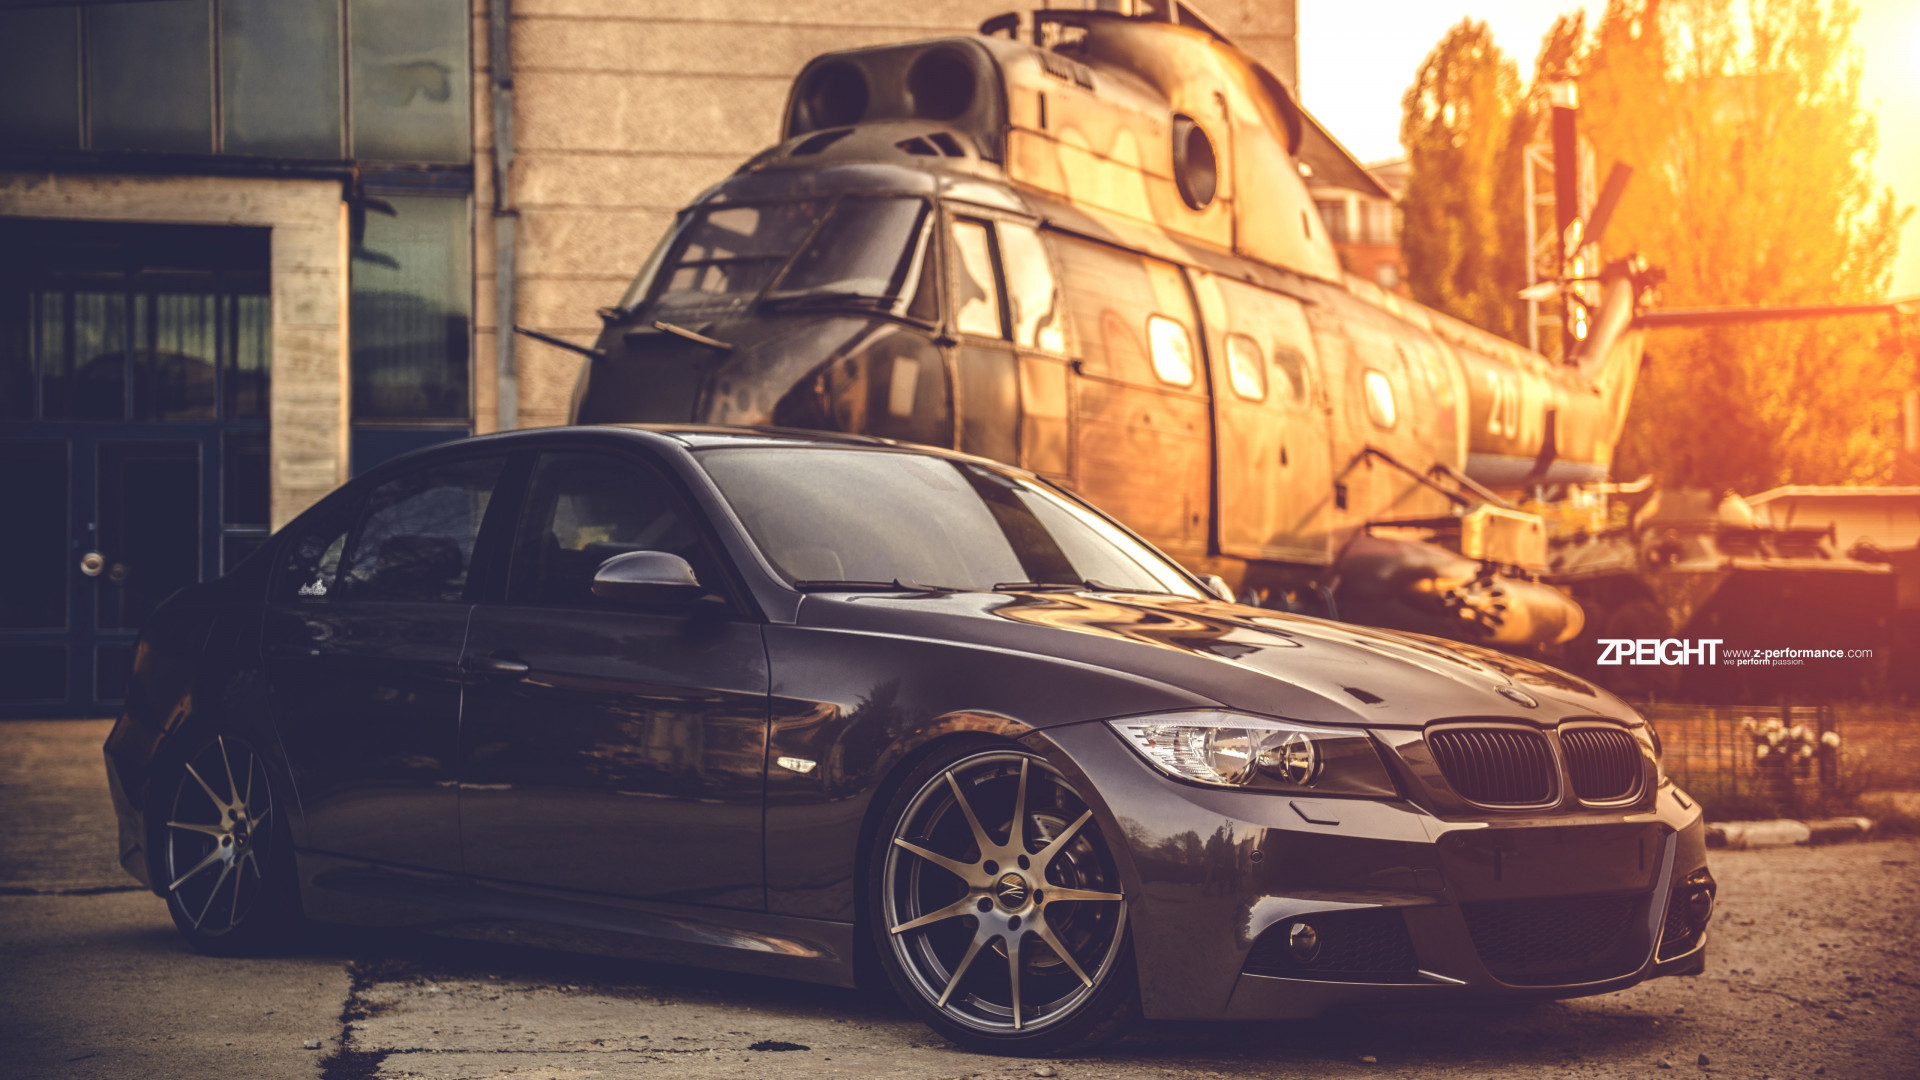 BMW E90 and one helicopter wallpaper 1920x1080